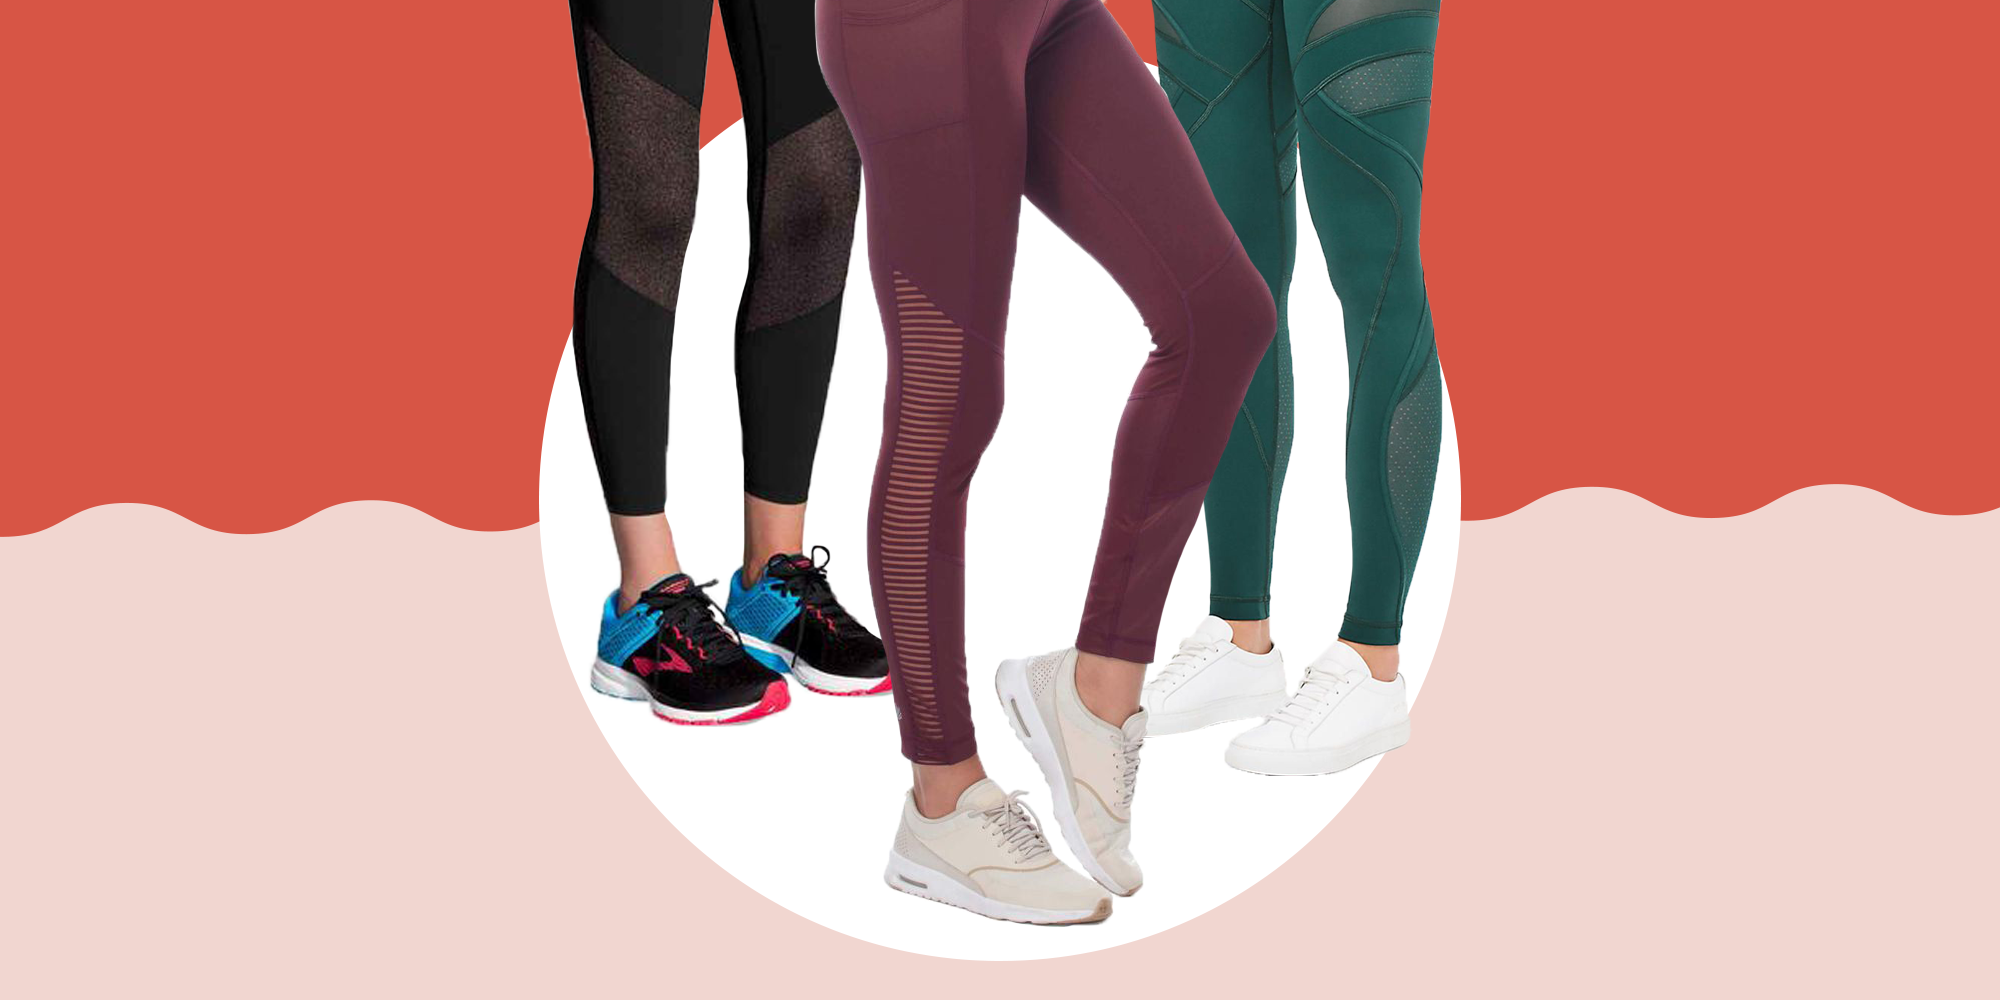 workout pants with mesh cutouts